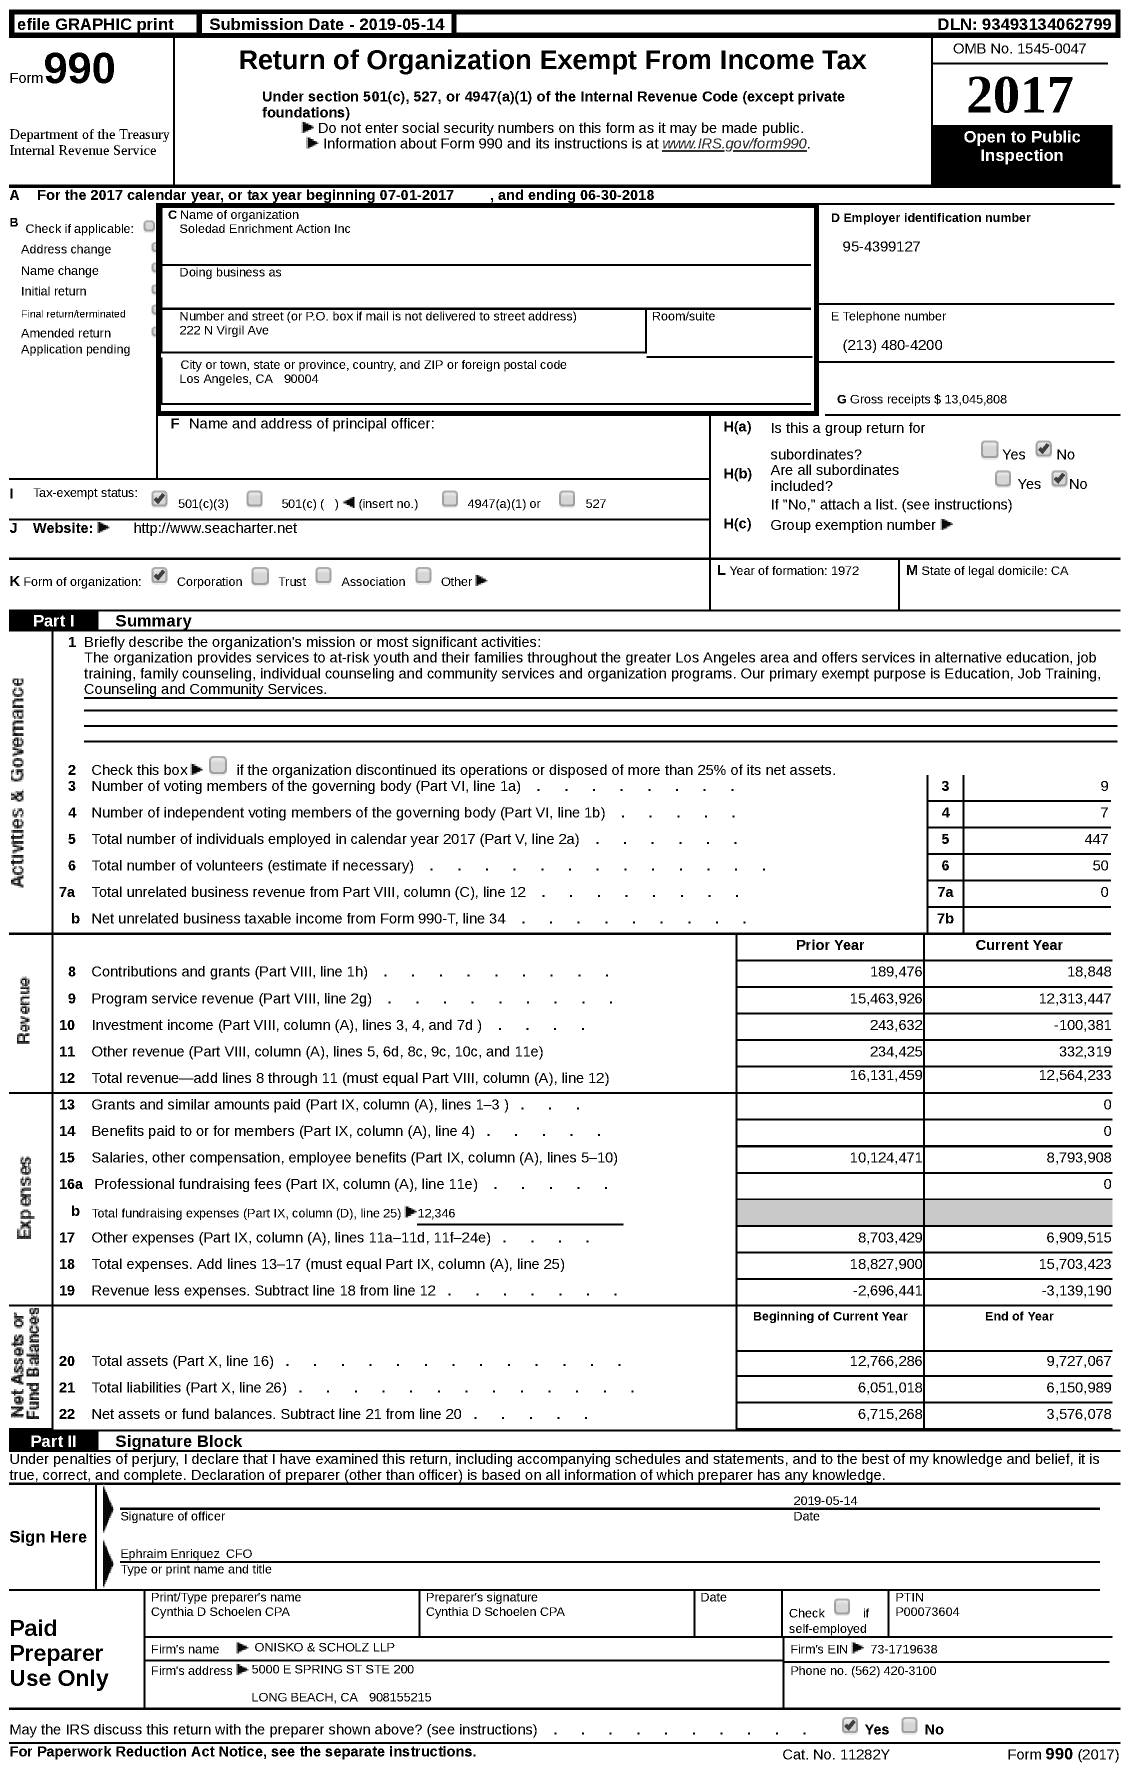 Image of first page of 2017 Form 990 for Soledad Enrichment Action (SEA)